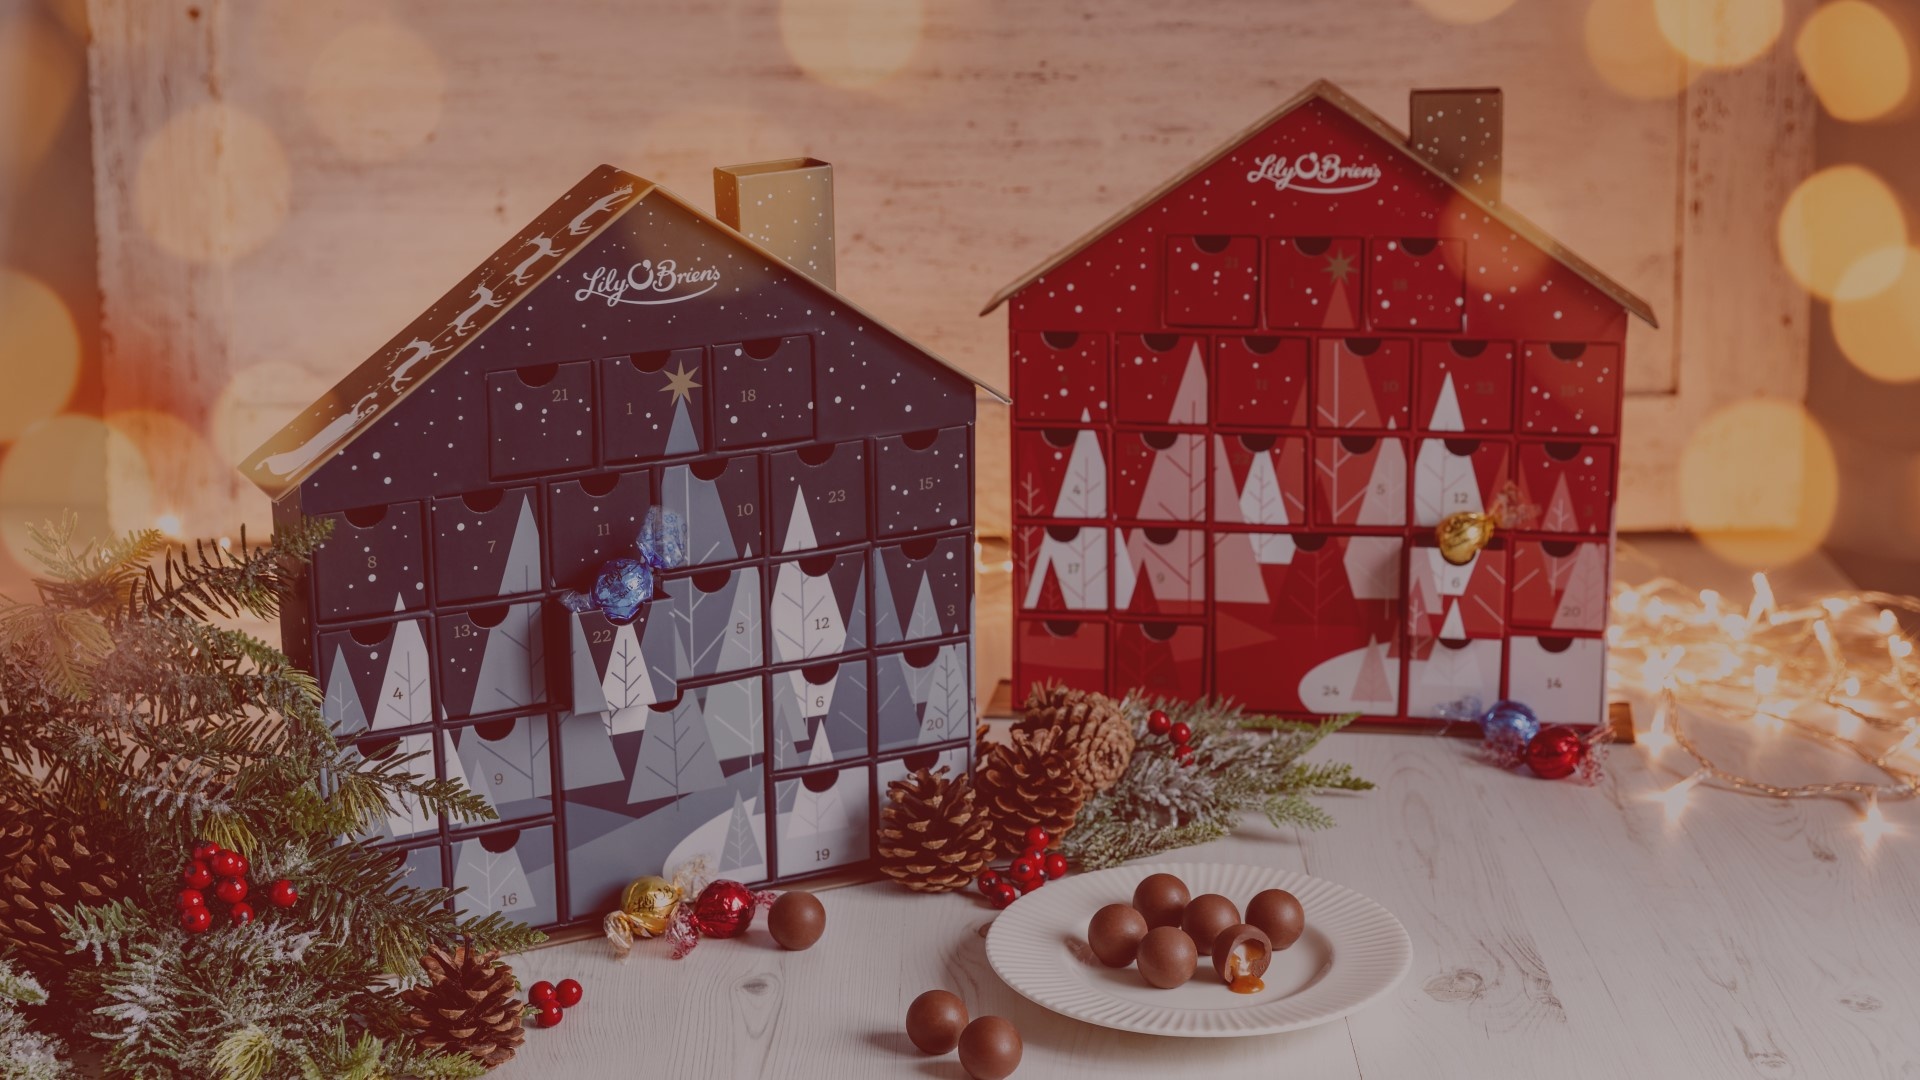 Chocolate Advent House by Lily O'Brien's